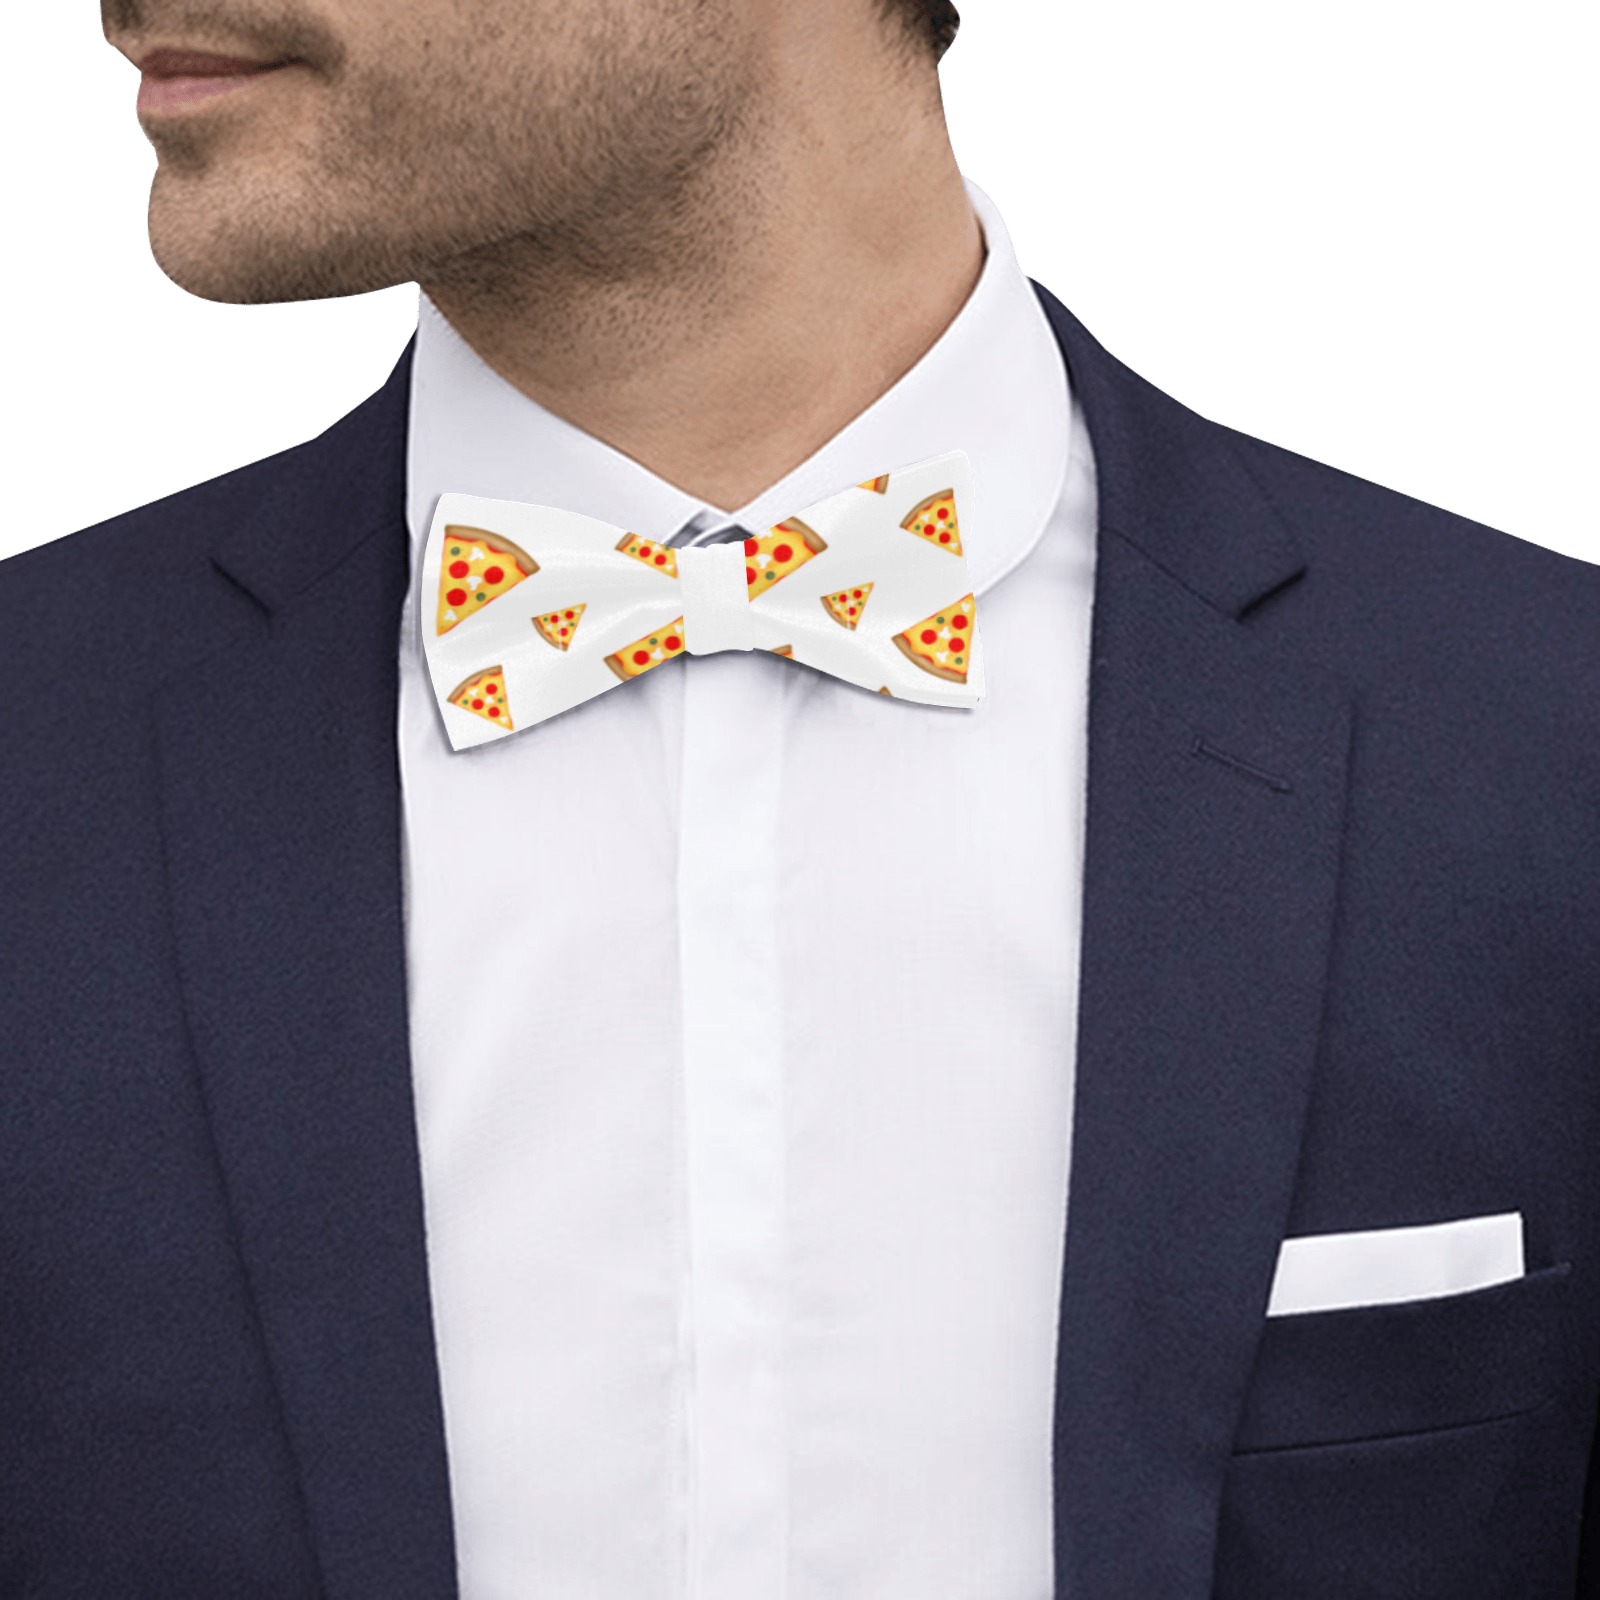 Cool and fun pizza slices pattern white suit accessory Custom Bow Tie